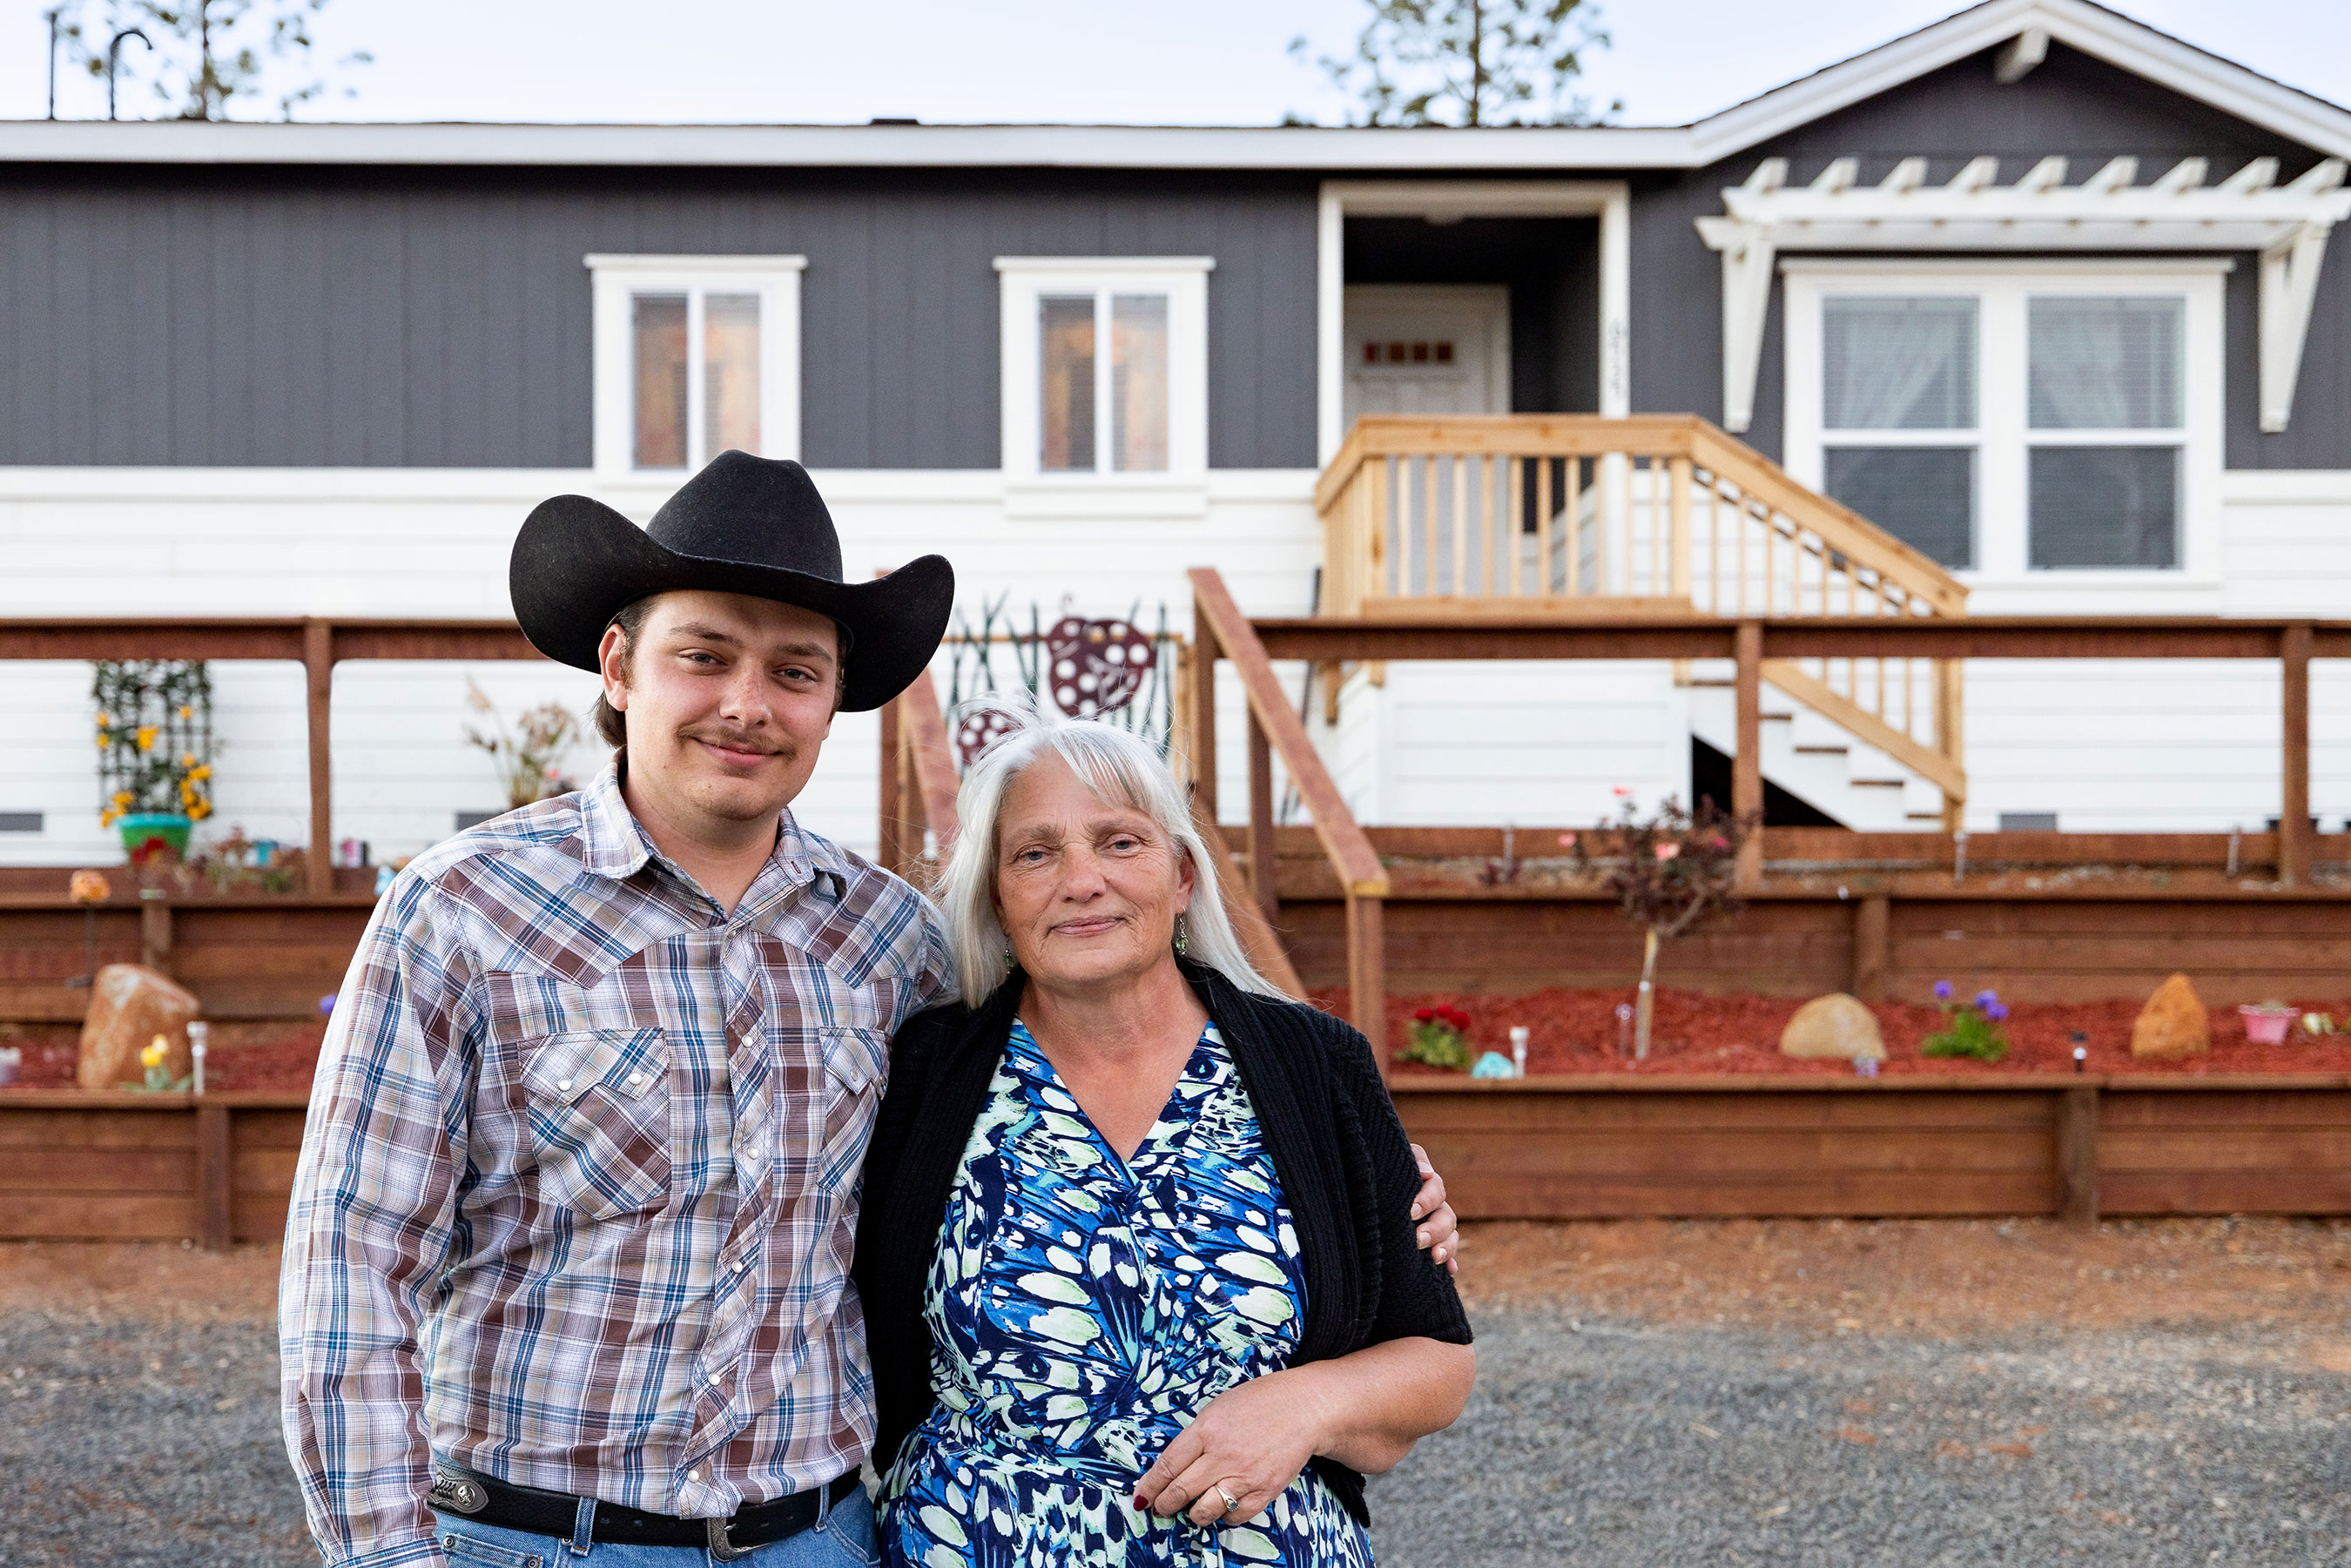 Read how Shirley Birdsong and her son, Salvador Schlemmer, rebuilt their lives in a new Clayton home after the devastating 2018 Camp Fire.